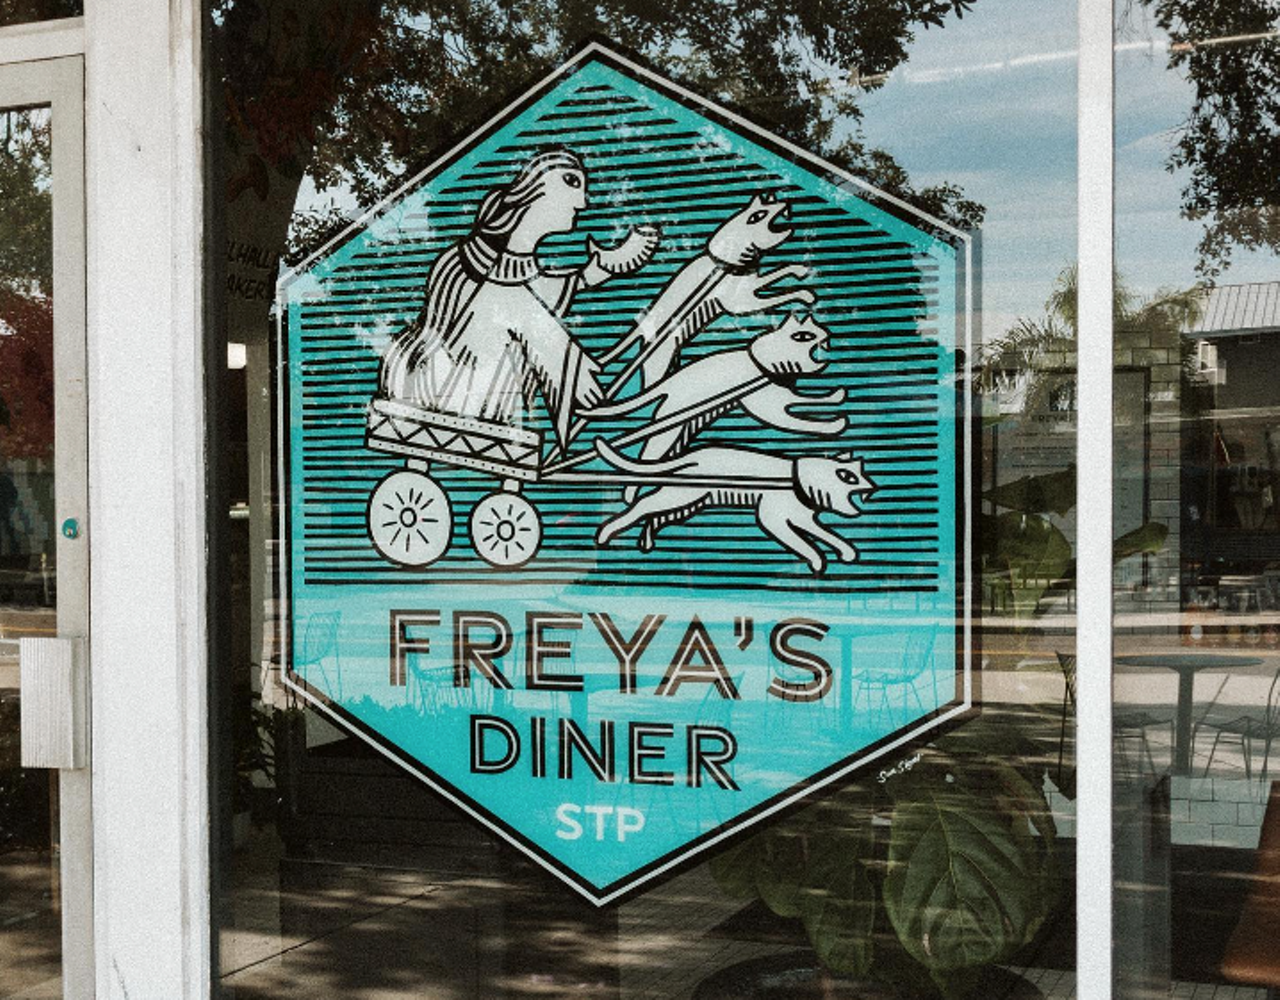 Freya’s Diner
2462 Central Ave, St. Petersburg
Freya’s Diner, a local favorite vegan lunch and dinner spot, announced its closure last July. “We want to take this time to thank everyone for their support this last year and for weathering so many changes that came our way. Unfortunately, St. Pete is seeing its slowest season to date and has left us with no other option but to close our doors,” its Instagram reads. “We’ve spoken to so many others that are feeling the effects of today’s economy. We aren’t the first to close this season, and we definitely won’t be the last.”
Photo freyasdinerstp/Instagram